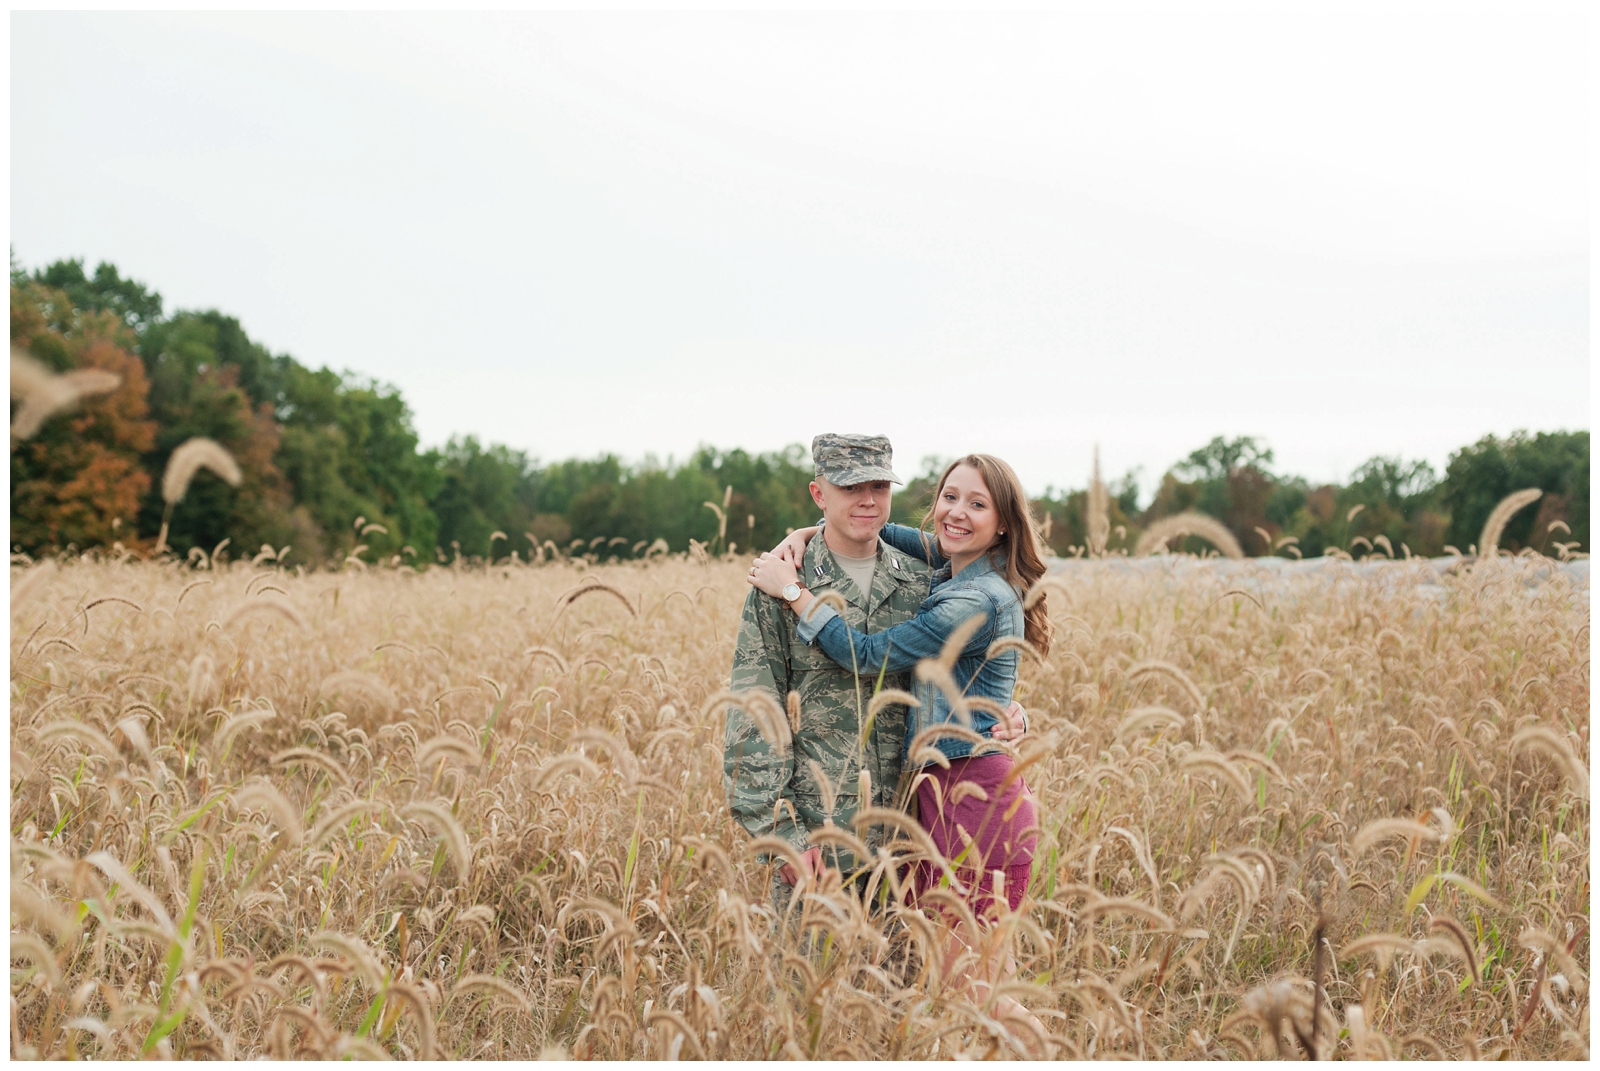 engaged girl hugging her fiancé during engagement session in wheat field 